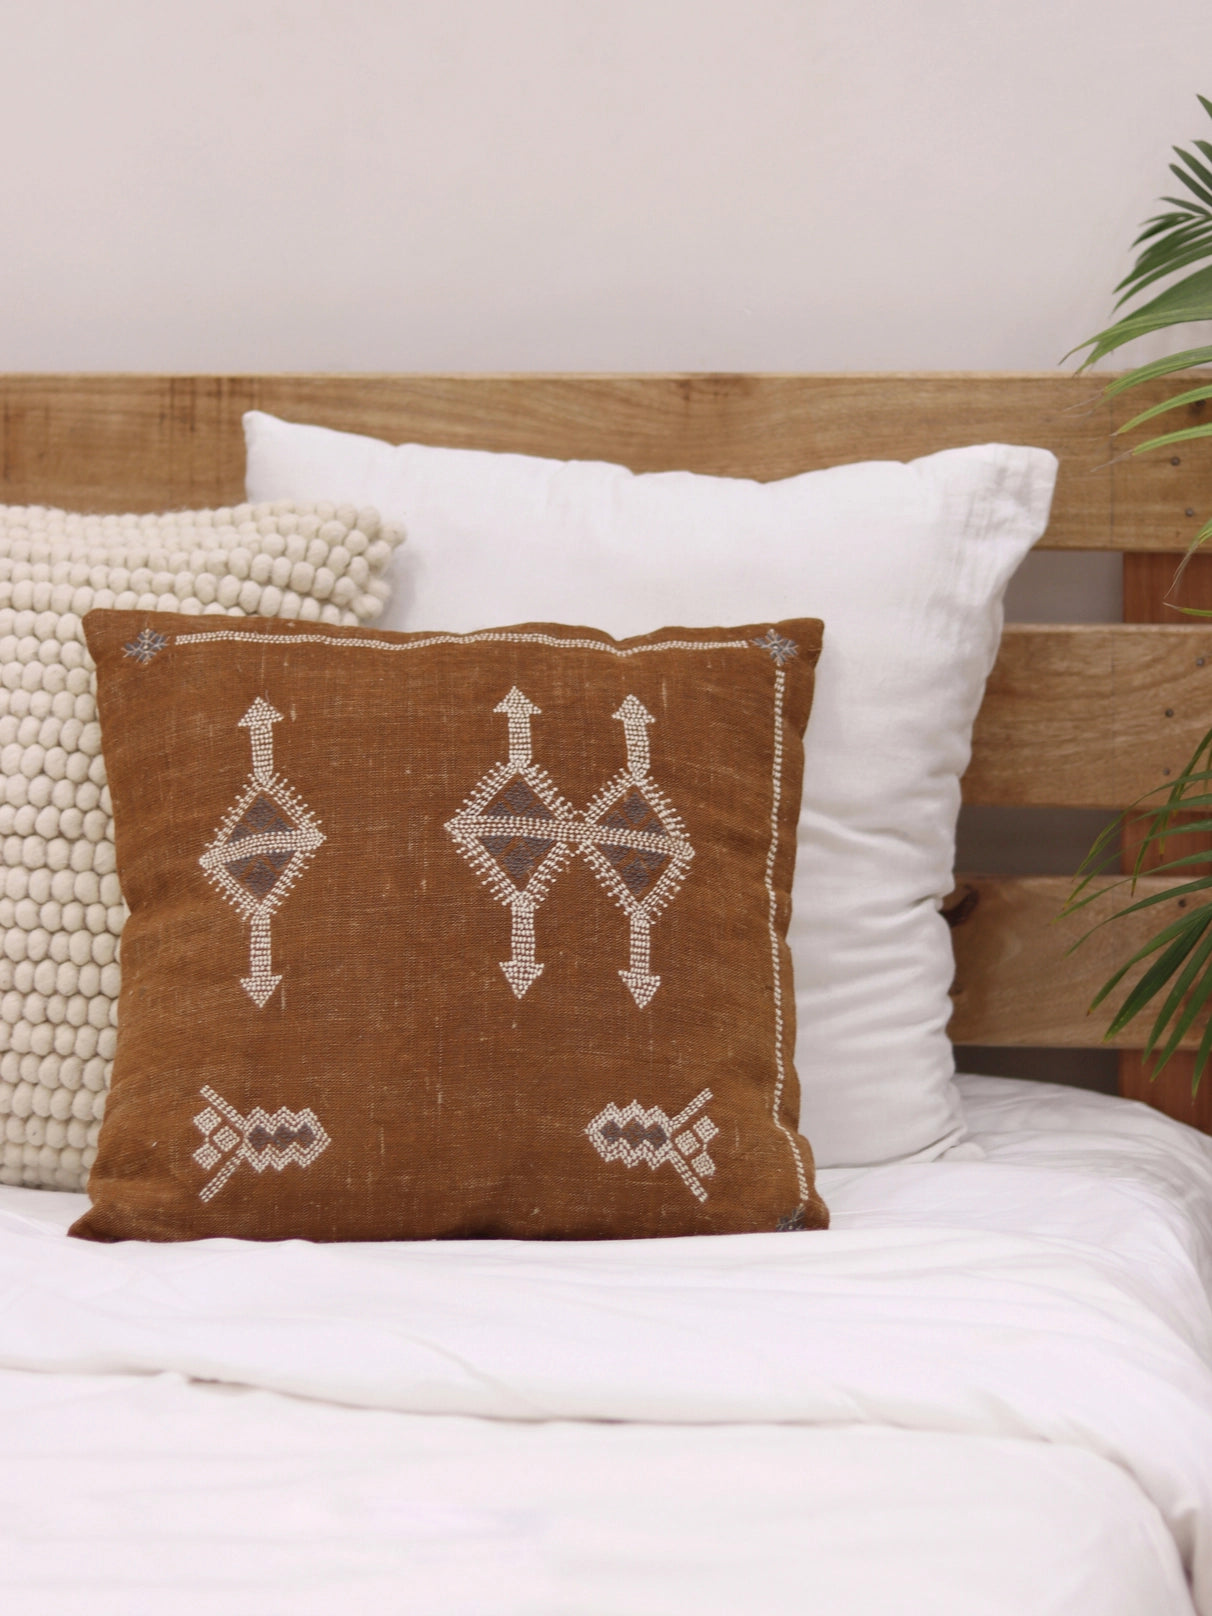 Moroccan Embroidered Ochre Linen Throw Pillow Cover